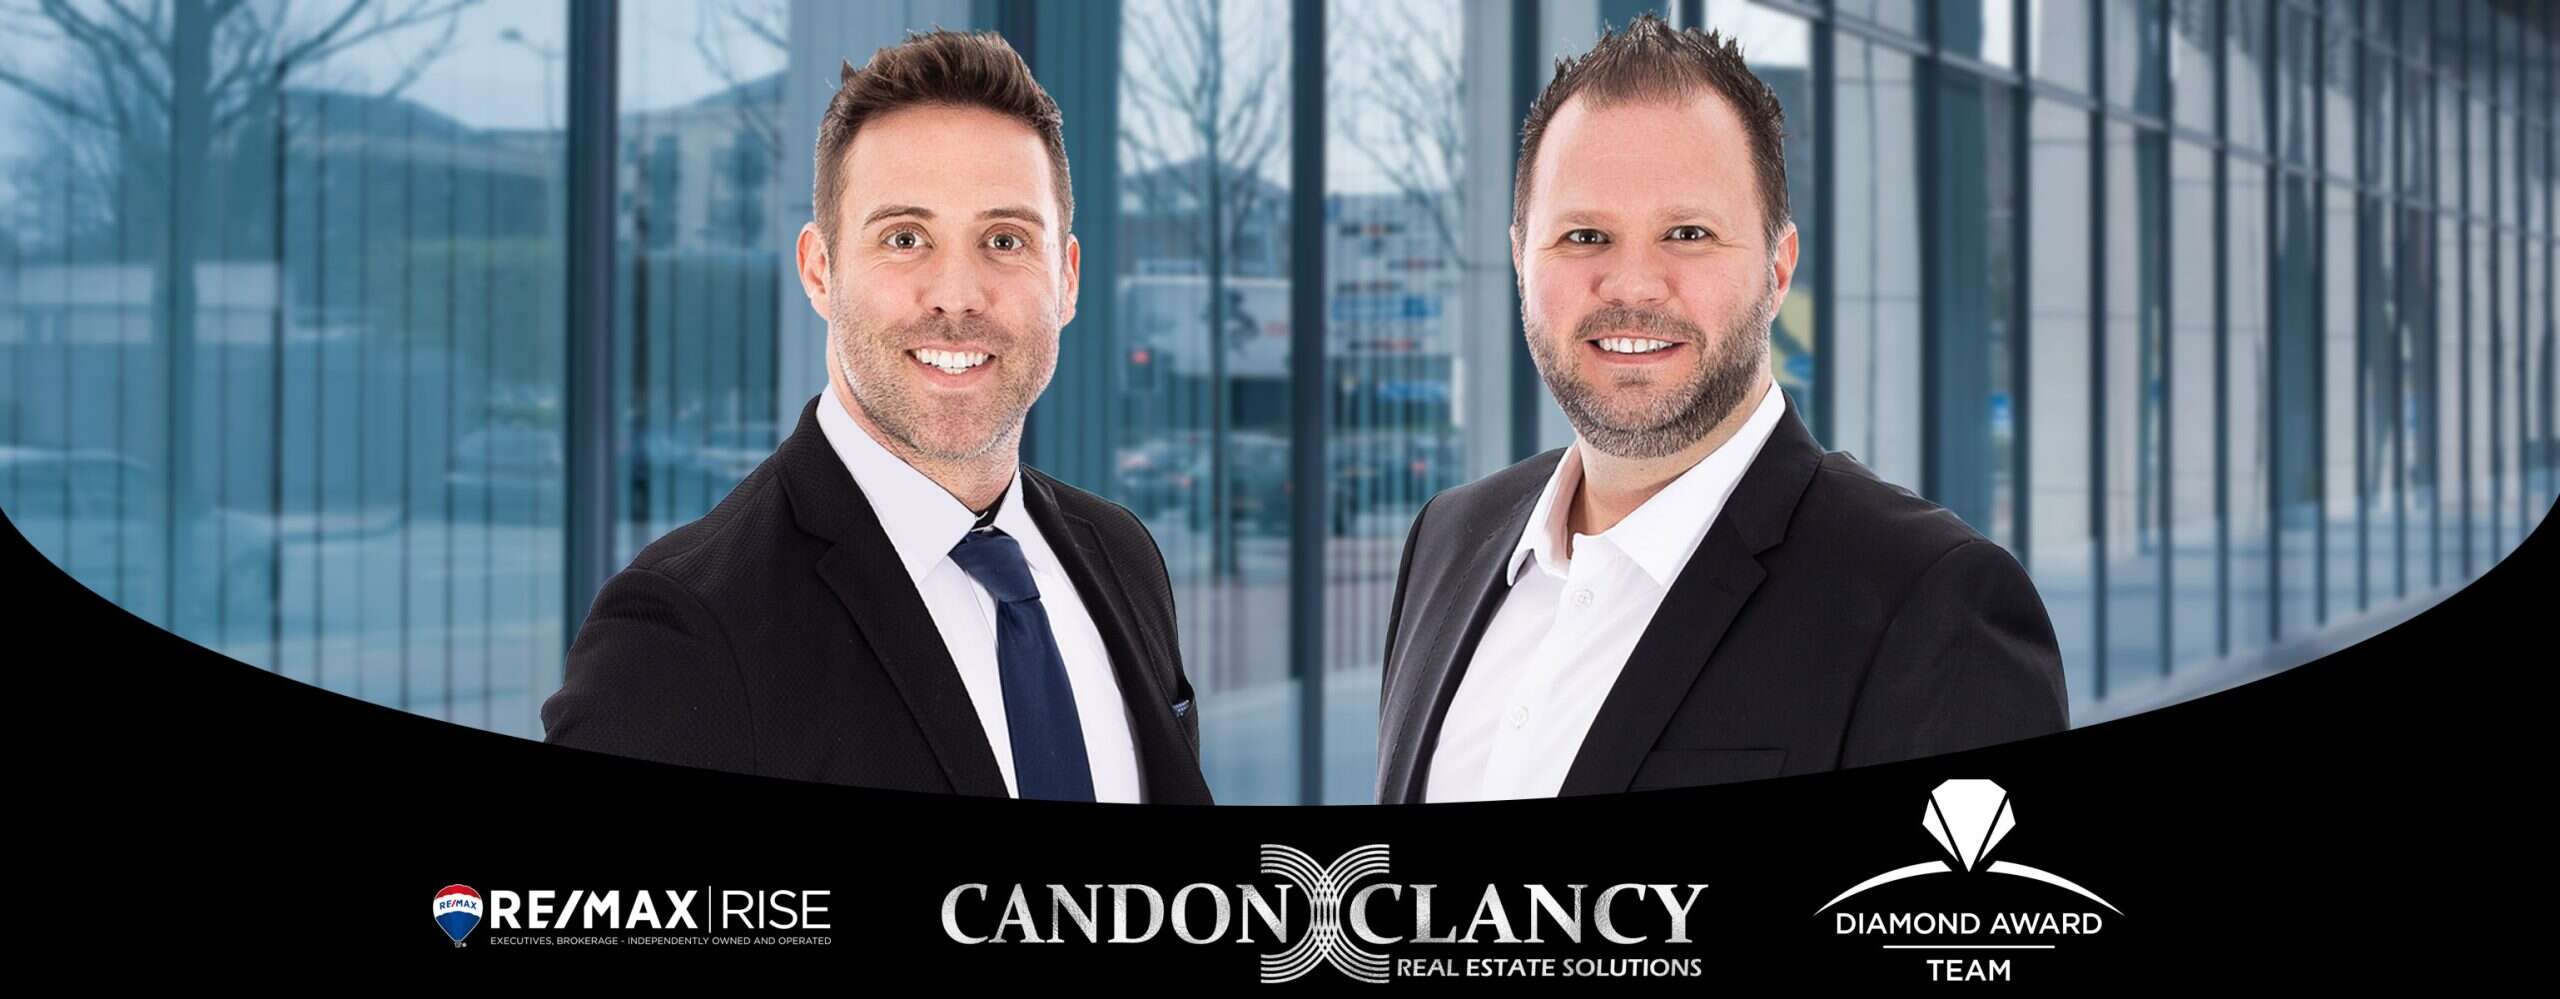 Candon & Clancy Remax Rise